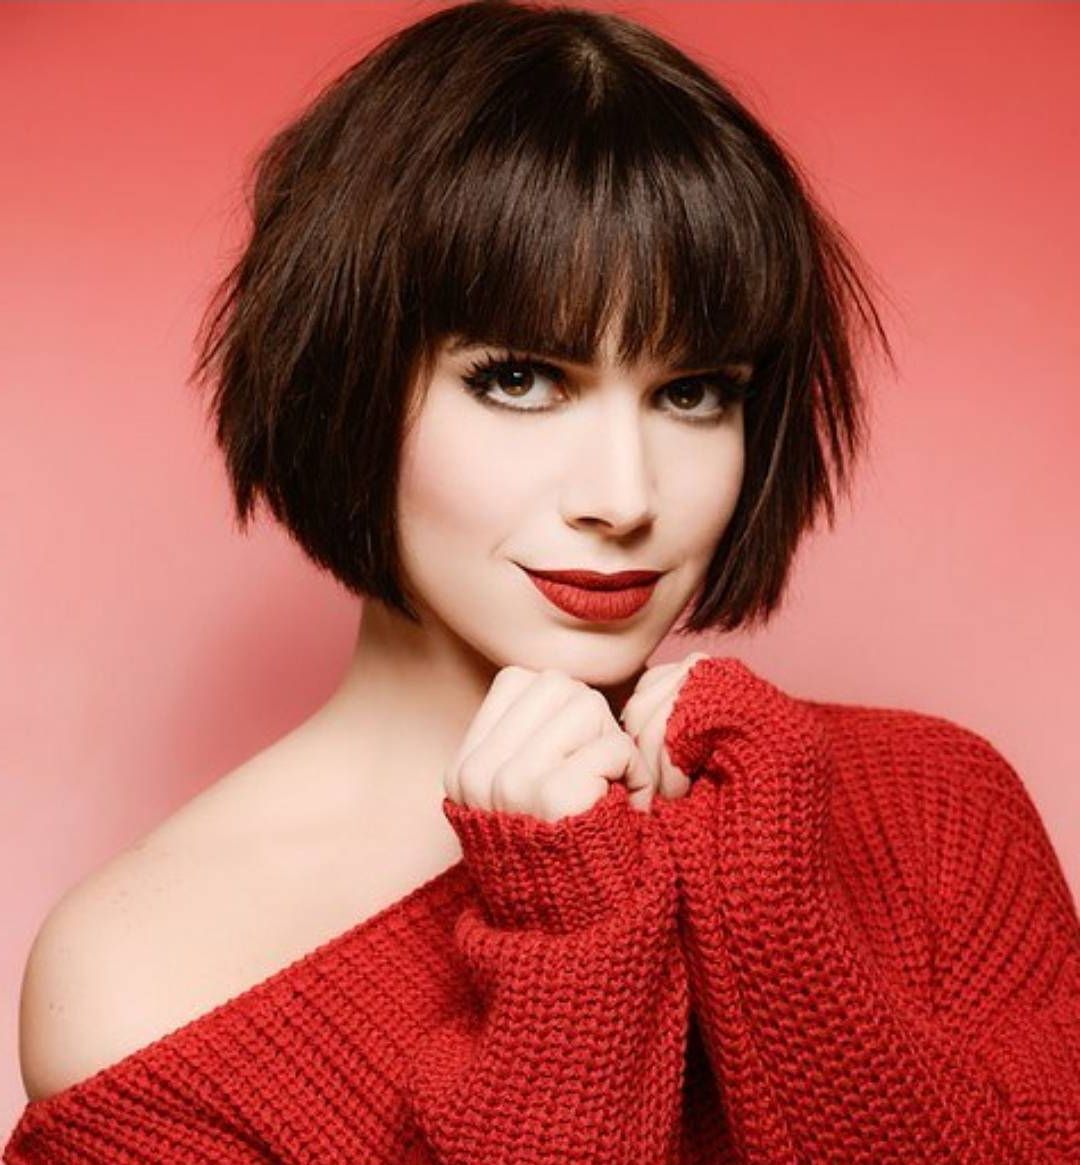 10 Chic Short Bob Haircuts That Balance Your Face Shape! Intended For Chic Short Bob Haircuts With Bangs (View 3 of 20)